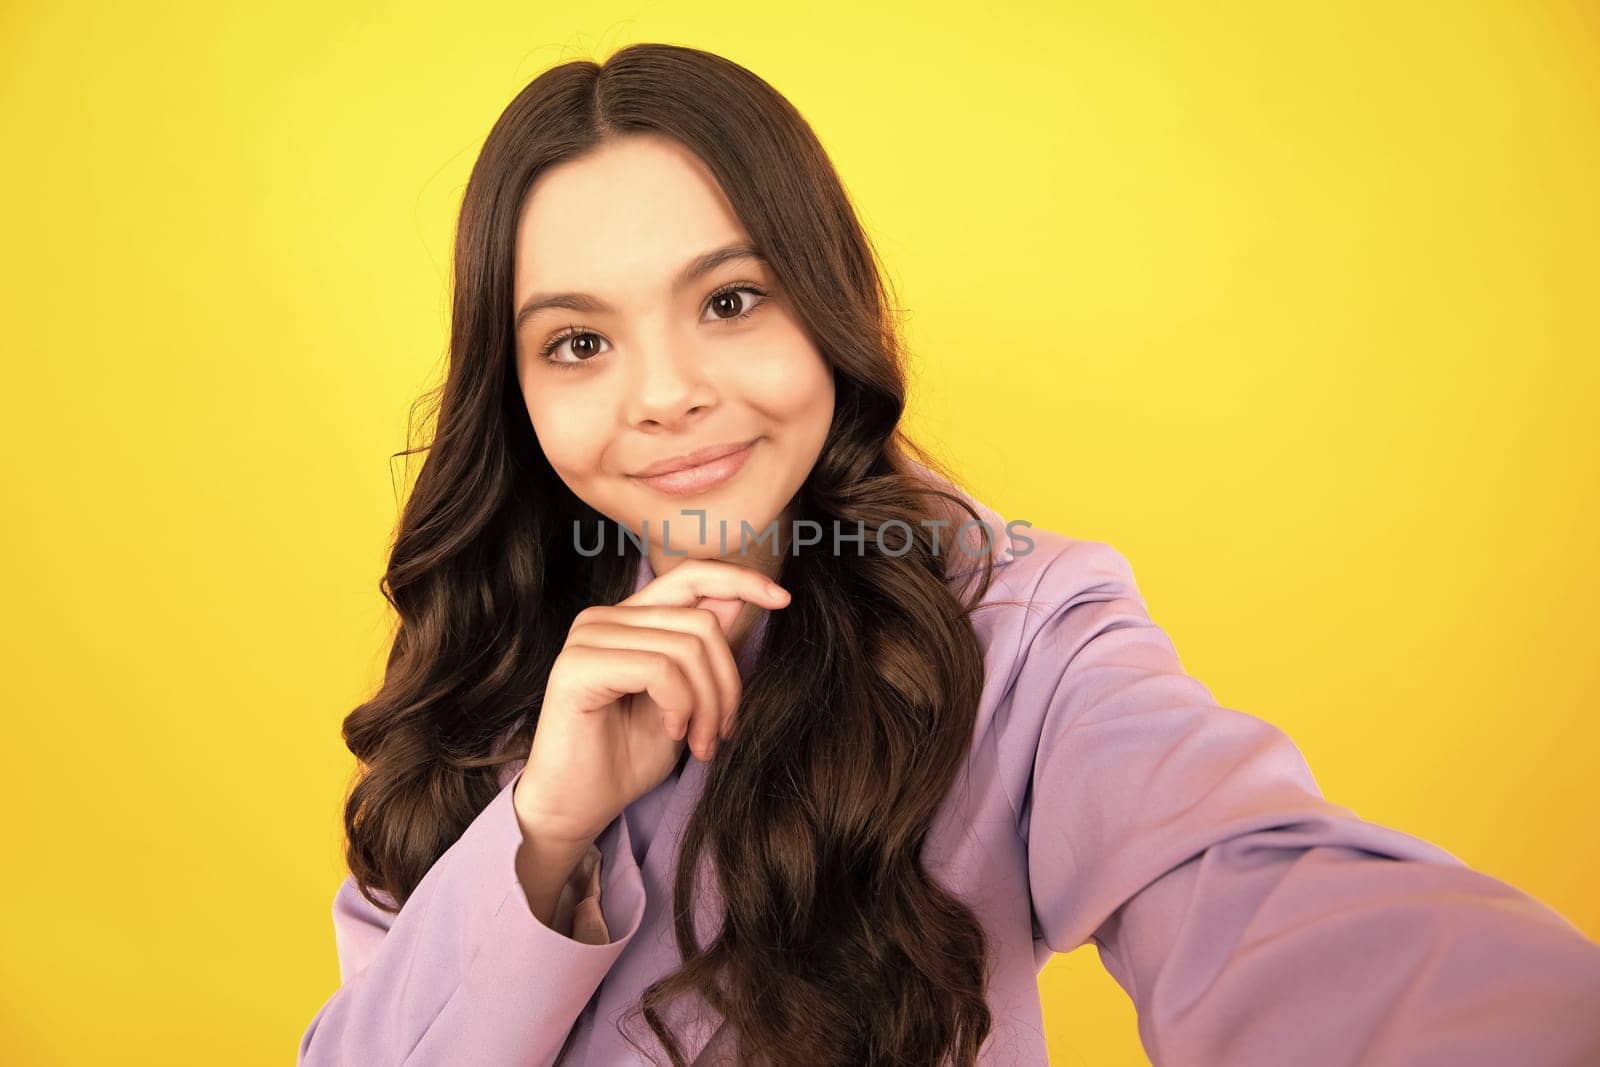 Teenager lifestyle. Beautiful ateenager child girl in moder suit making selfie posingisolated on yellow background. Happy teenager, positive and smiling emotions of teen girl